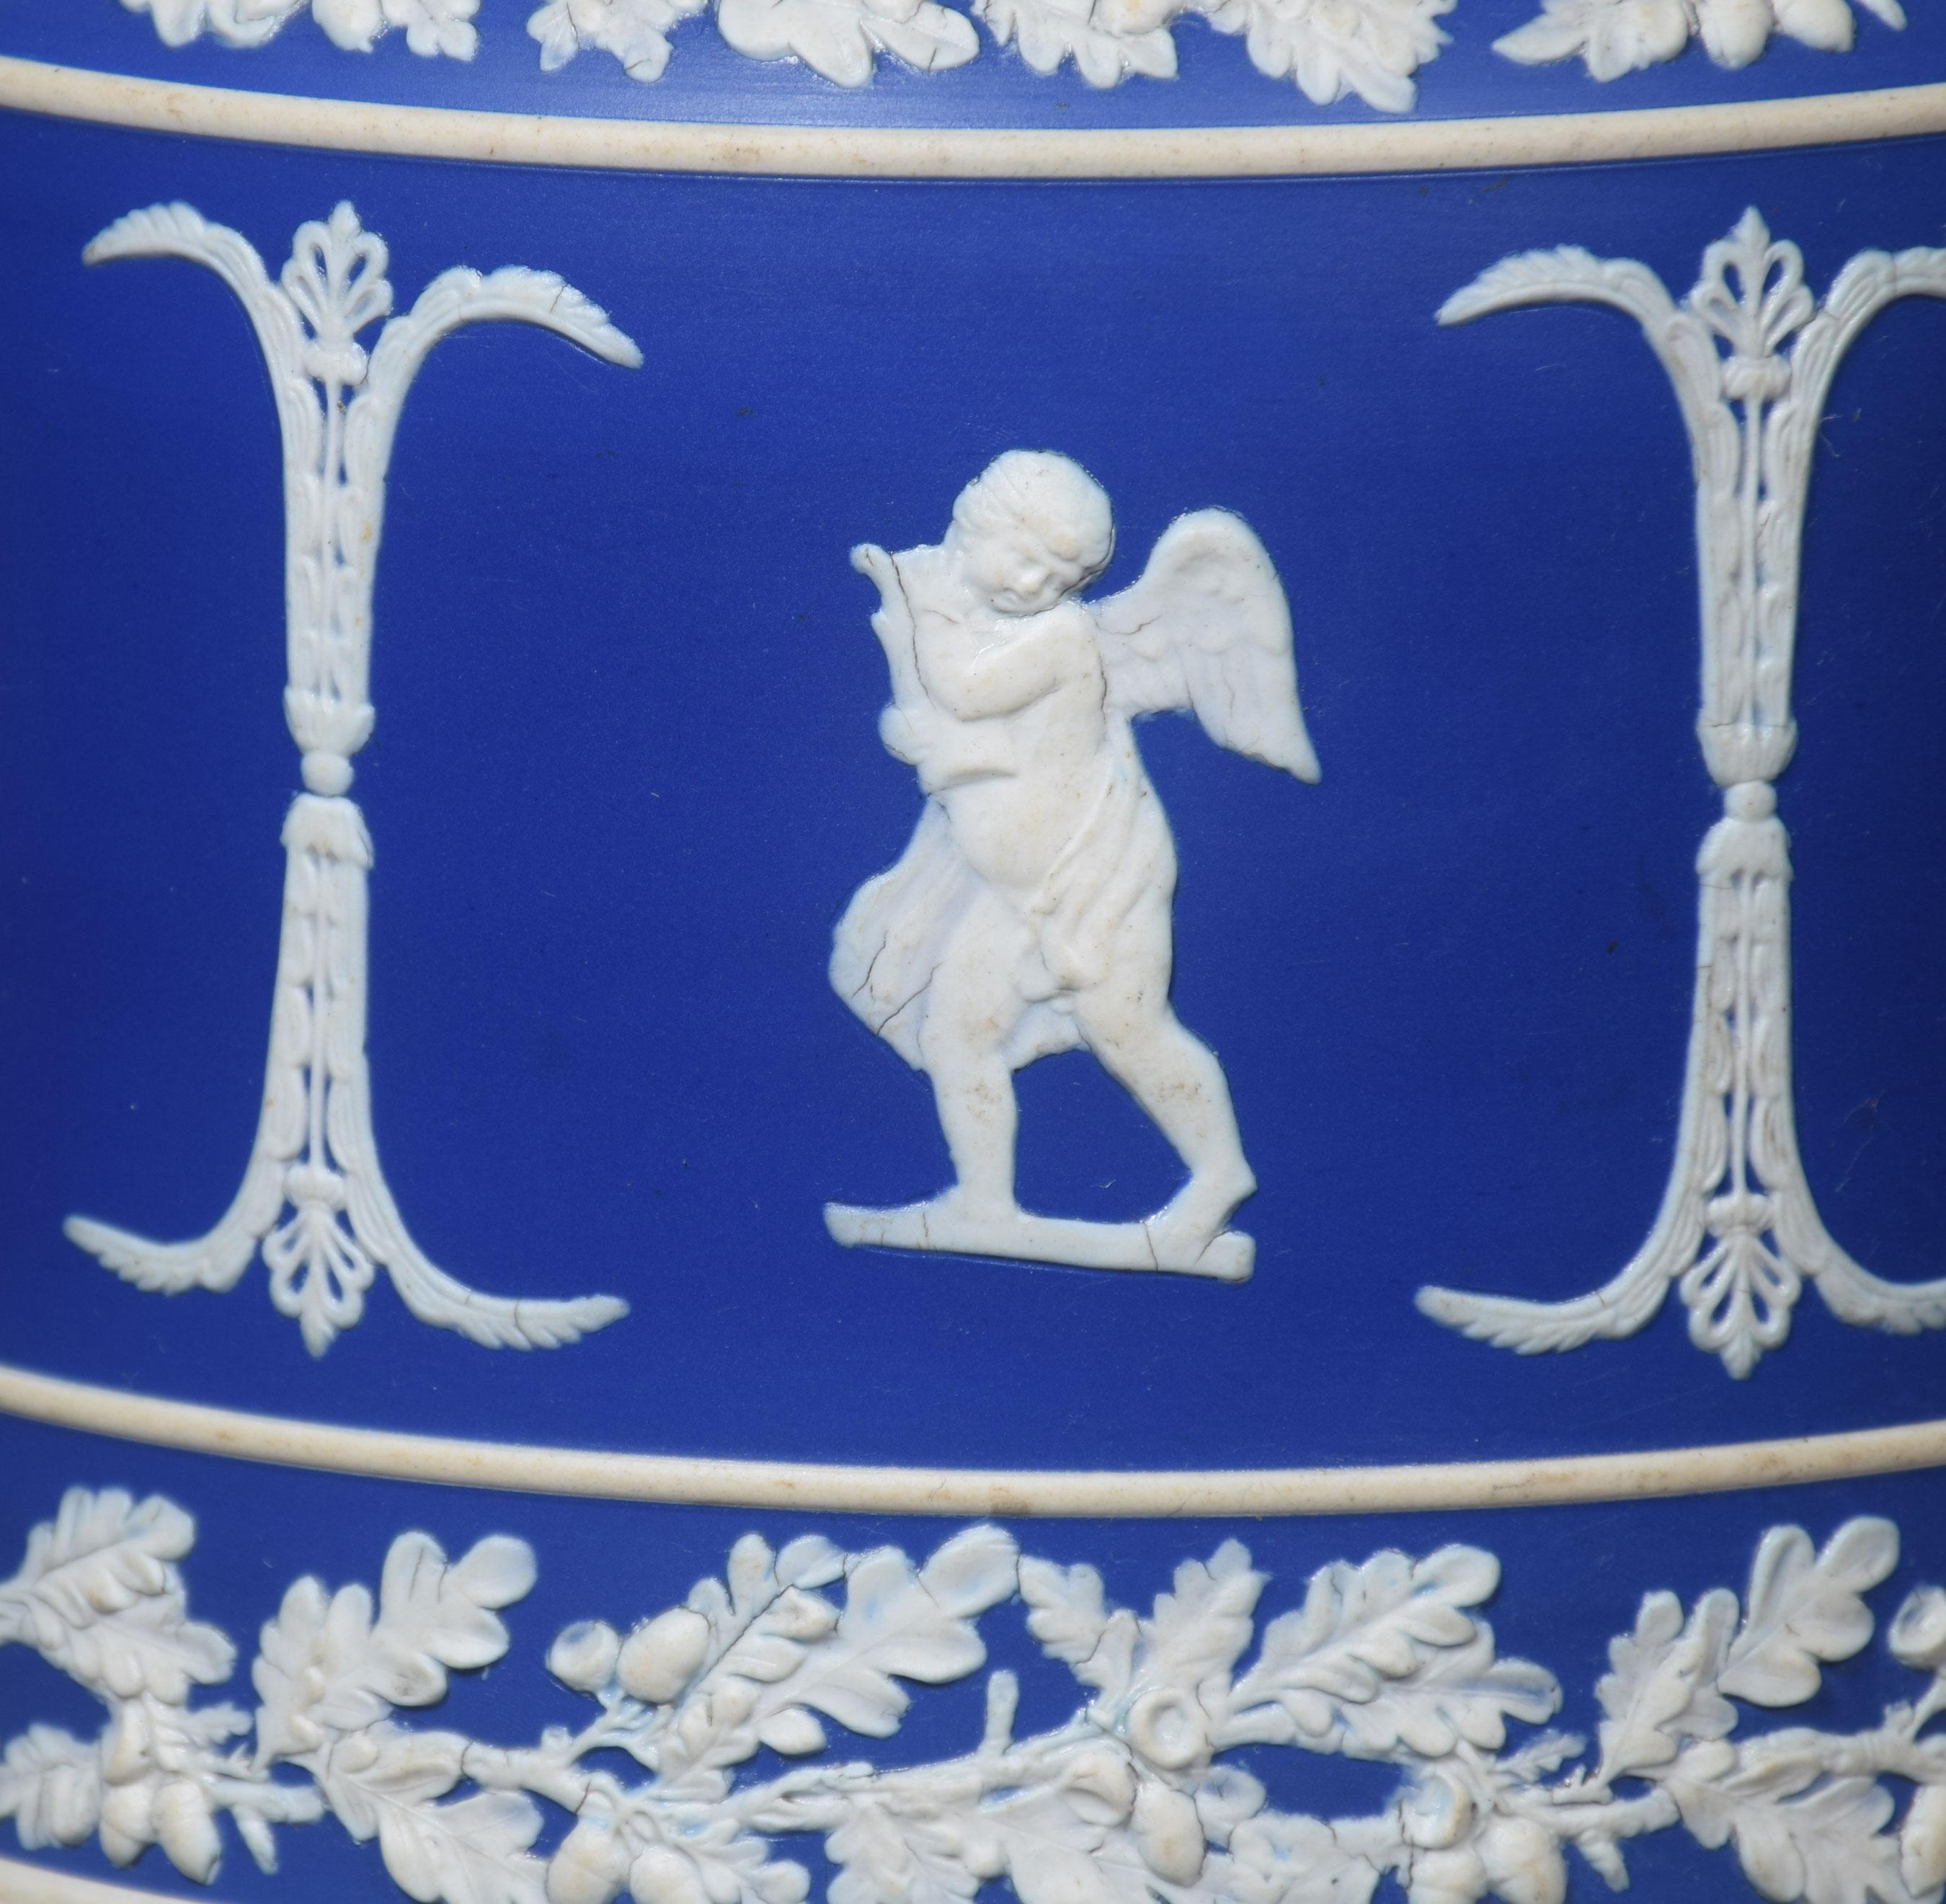 A late 19th century blue dip Jasperware cylindrical form cheese dish and cover, with acorn finial, decorated in relief with winged figures within bands of oak leaves.
Dimensions:
Height 10 inches
Width 11 inches
Depth 11 inches.